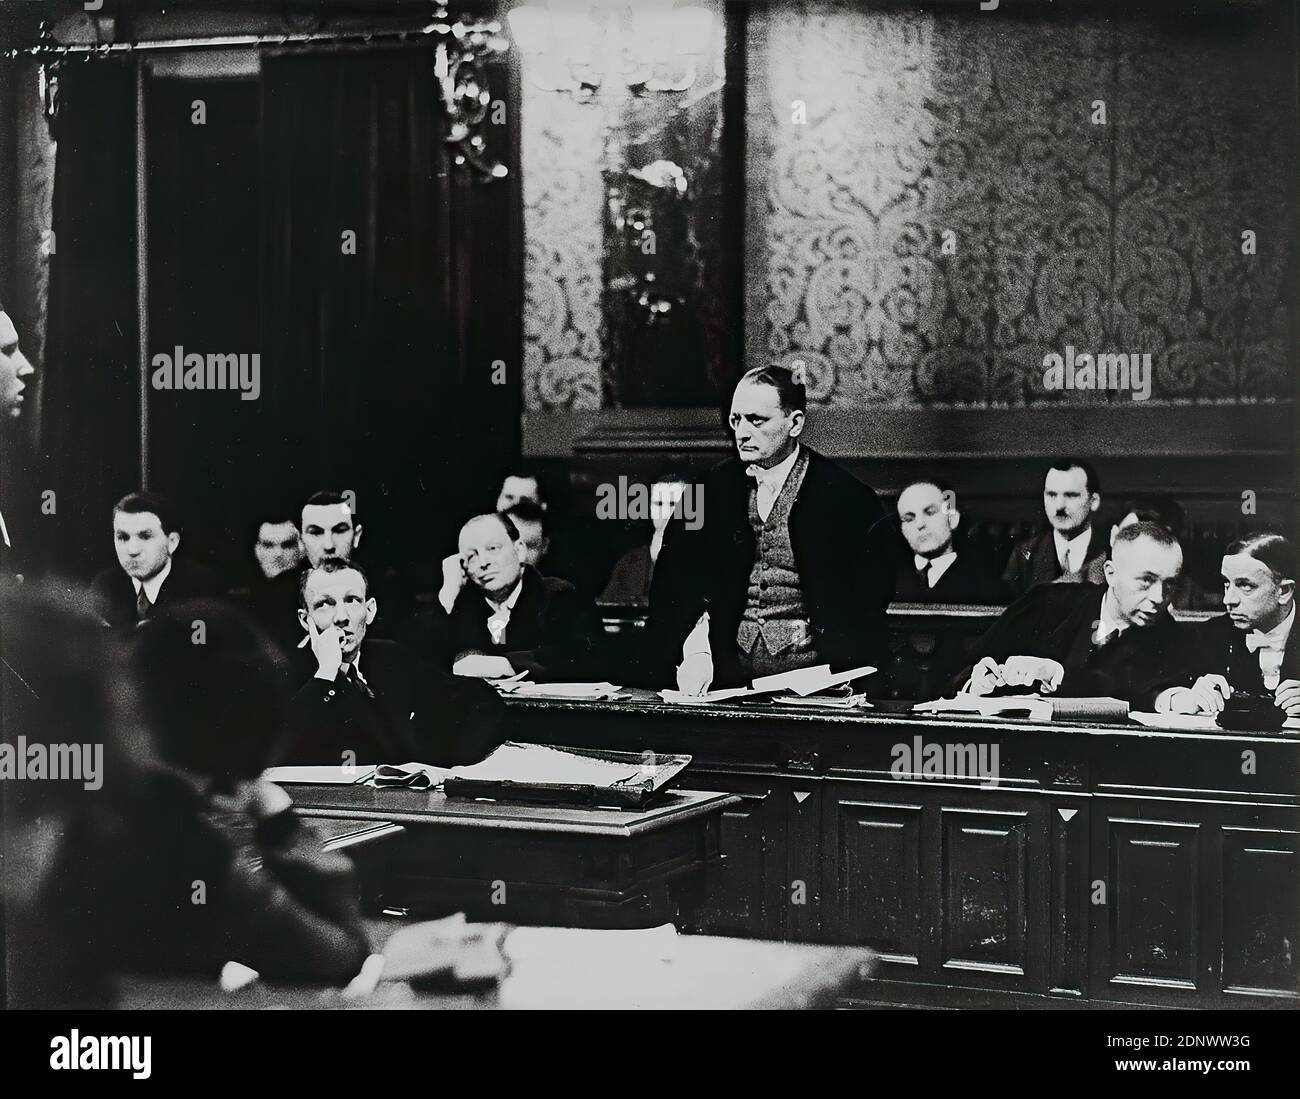 Erich Salomon, Dr. Erich Frey during the interrogation of a witness in the trial against the criminal organization Immertreu, Berlin-Moabit, Staatliche Landesbildstelle Hamburg, collection on the history of photography, silver gelatin paper, black and white positive process, image size: height: 27.30 cm; width: 35.00 cm, stamp: verso center: PHOTO DR. Stock Photo